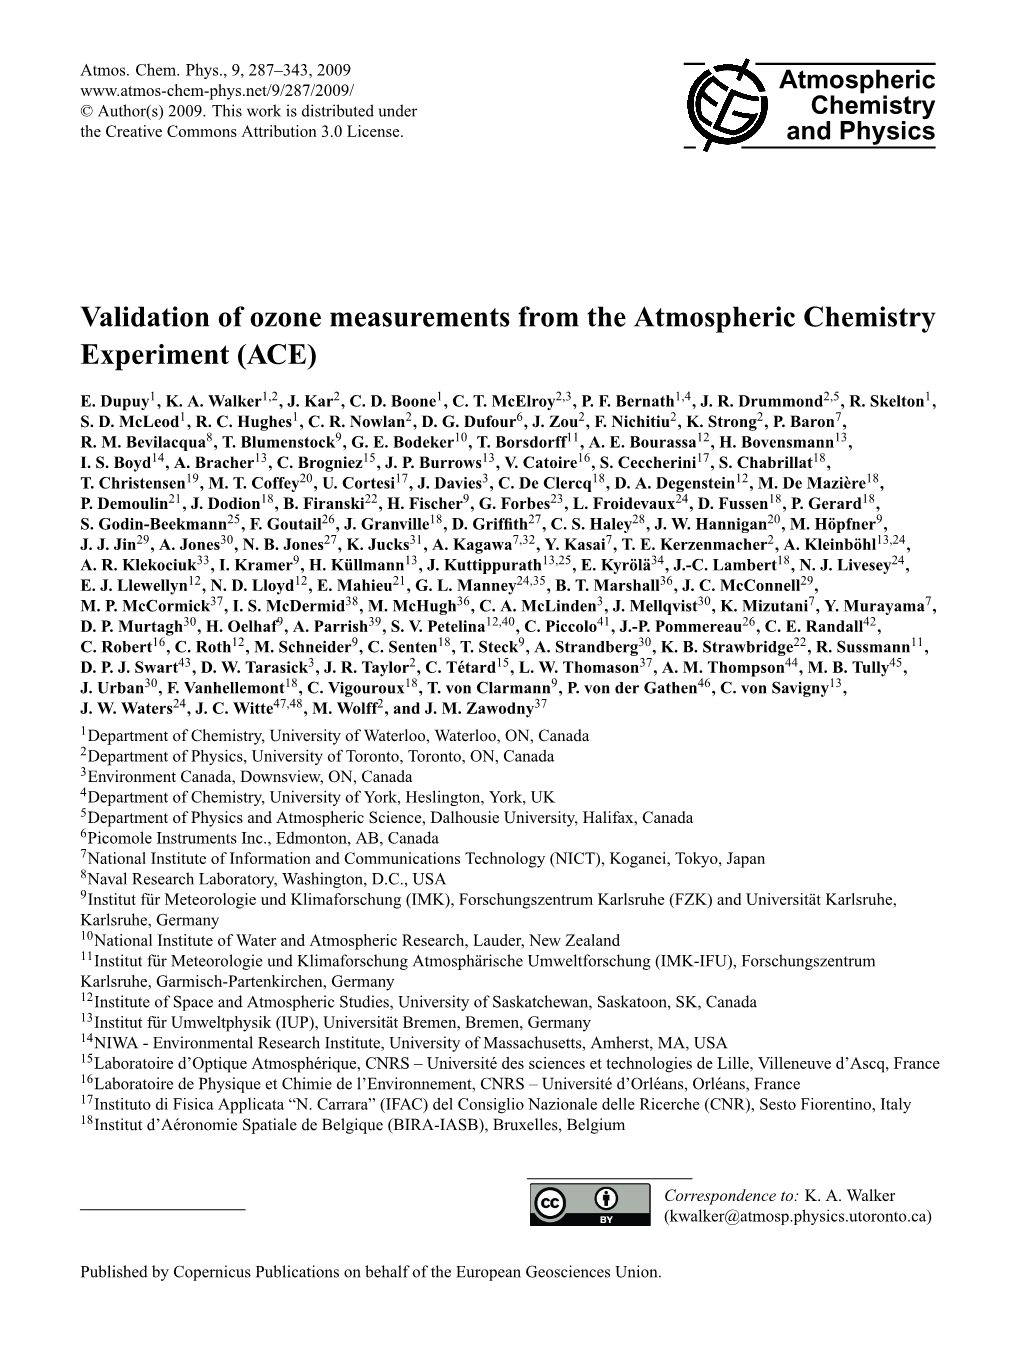 Validation of Ozone Measurements from the Atmospheric Chemistry Experiment (ACE)